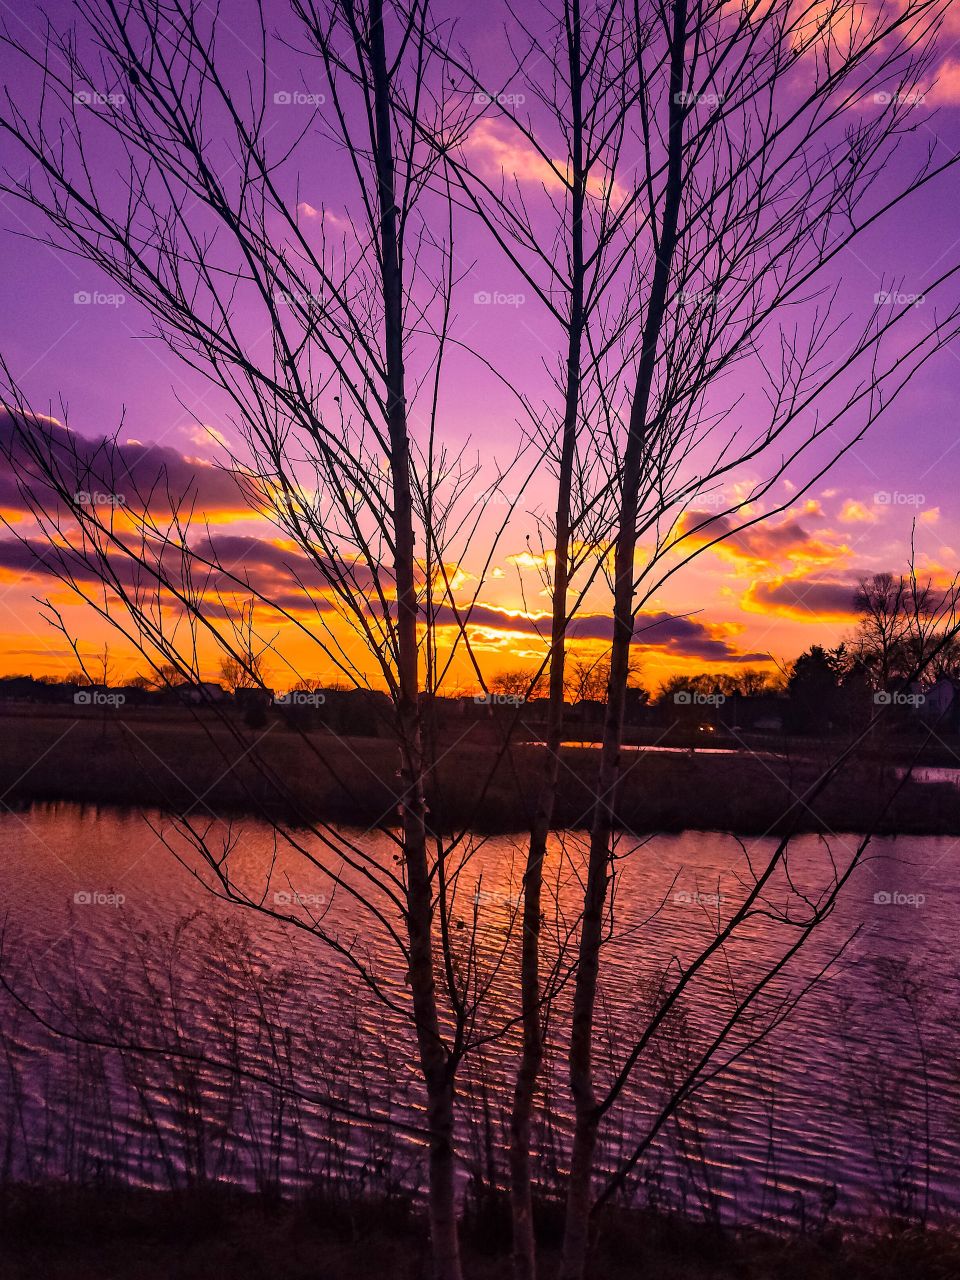 Breathtaking sunset between the twiggy branches of a leafless young tree, the pink and orange sky casts its colorful reflection on the lake below it. 